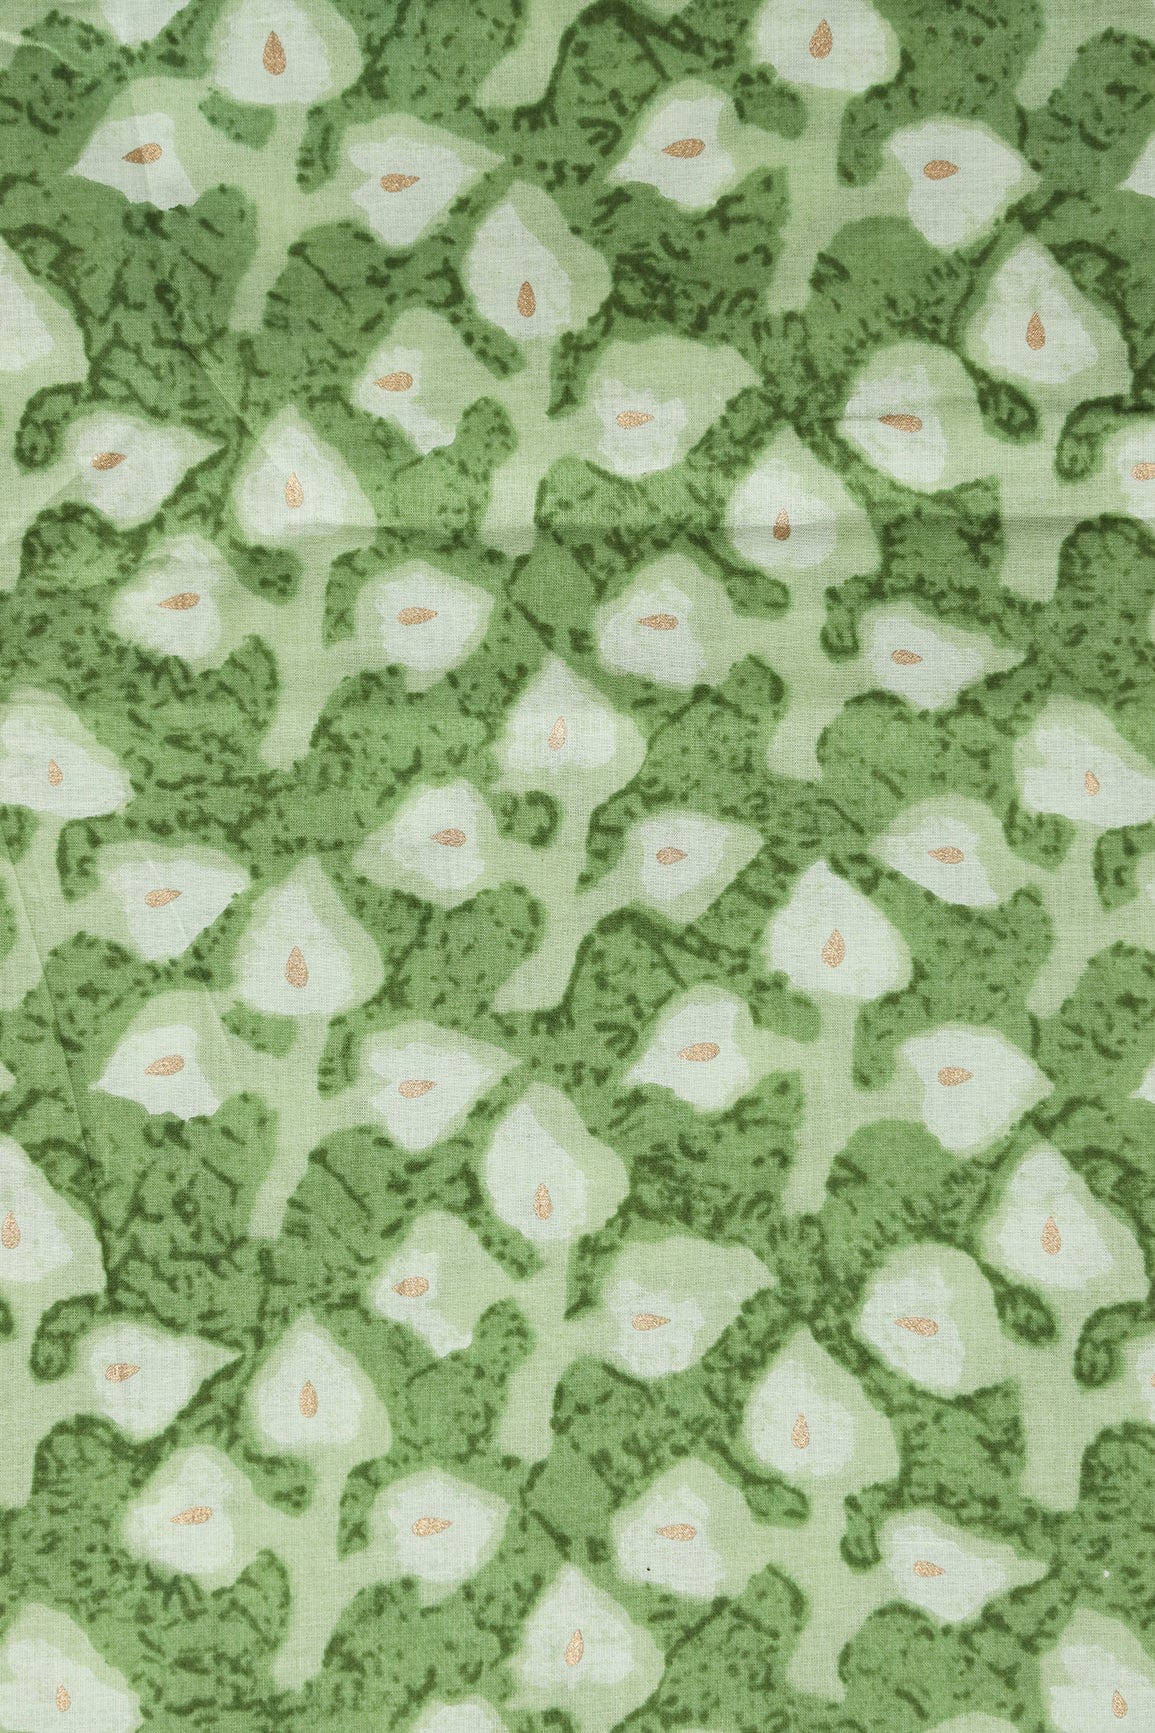 doeraa Prints Fern Green And Mint Green Floral Print On Pure Mul Cotton Fabric